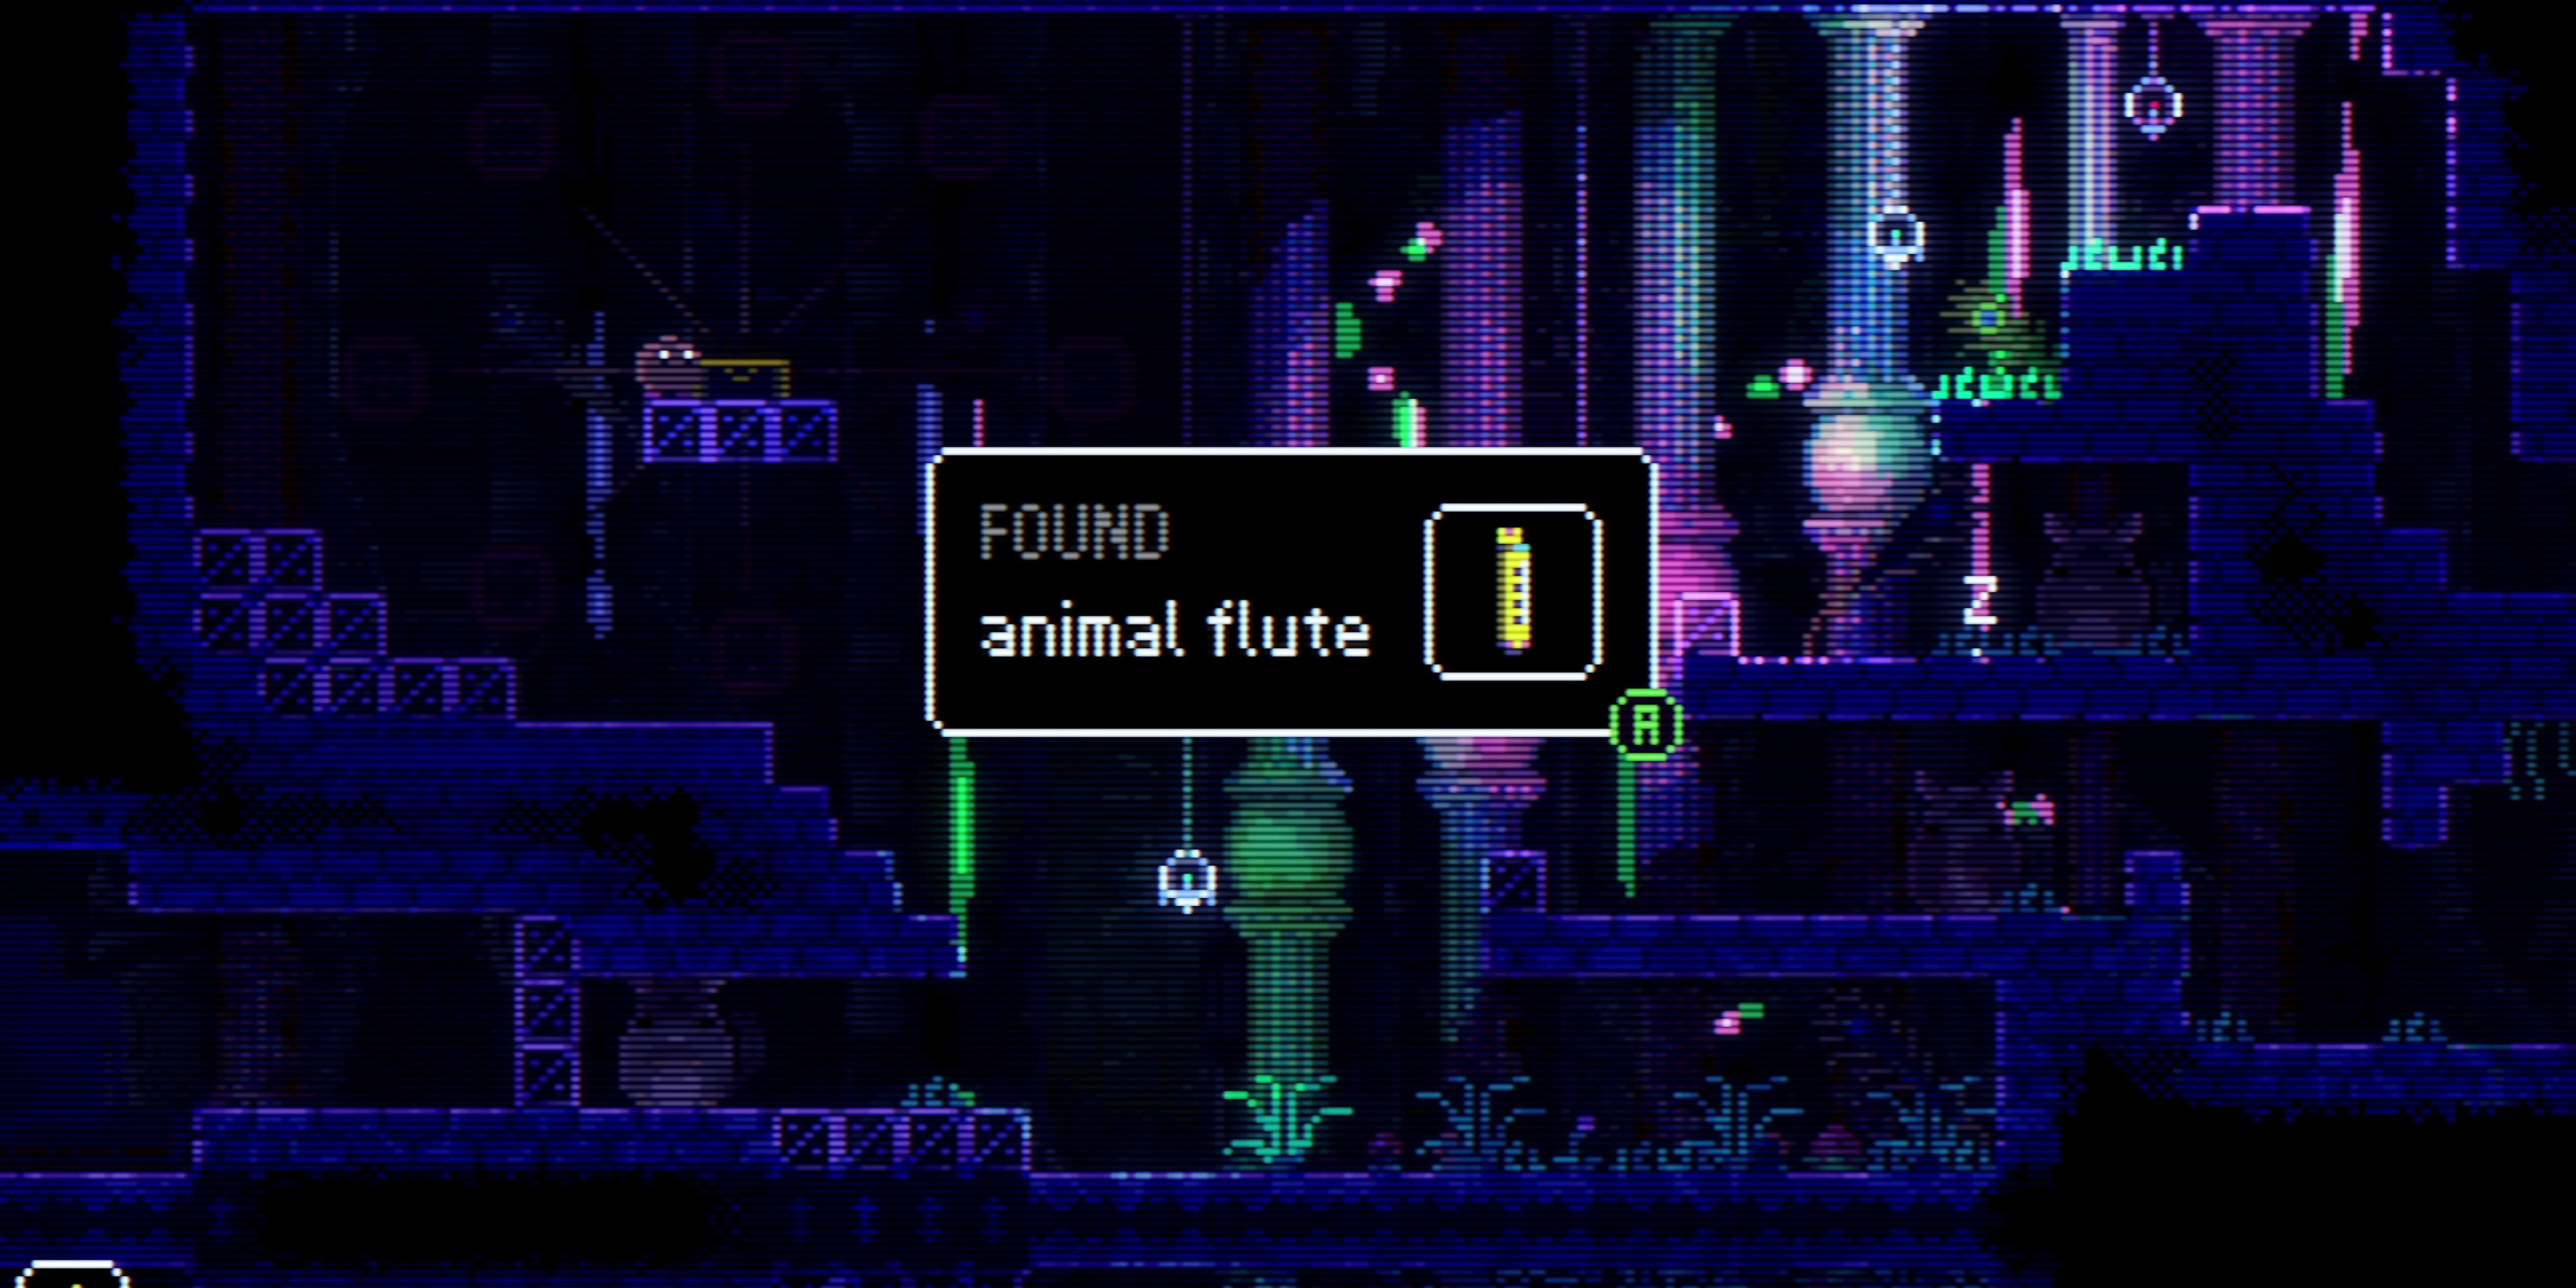 animal flute location in animal well